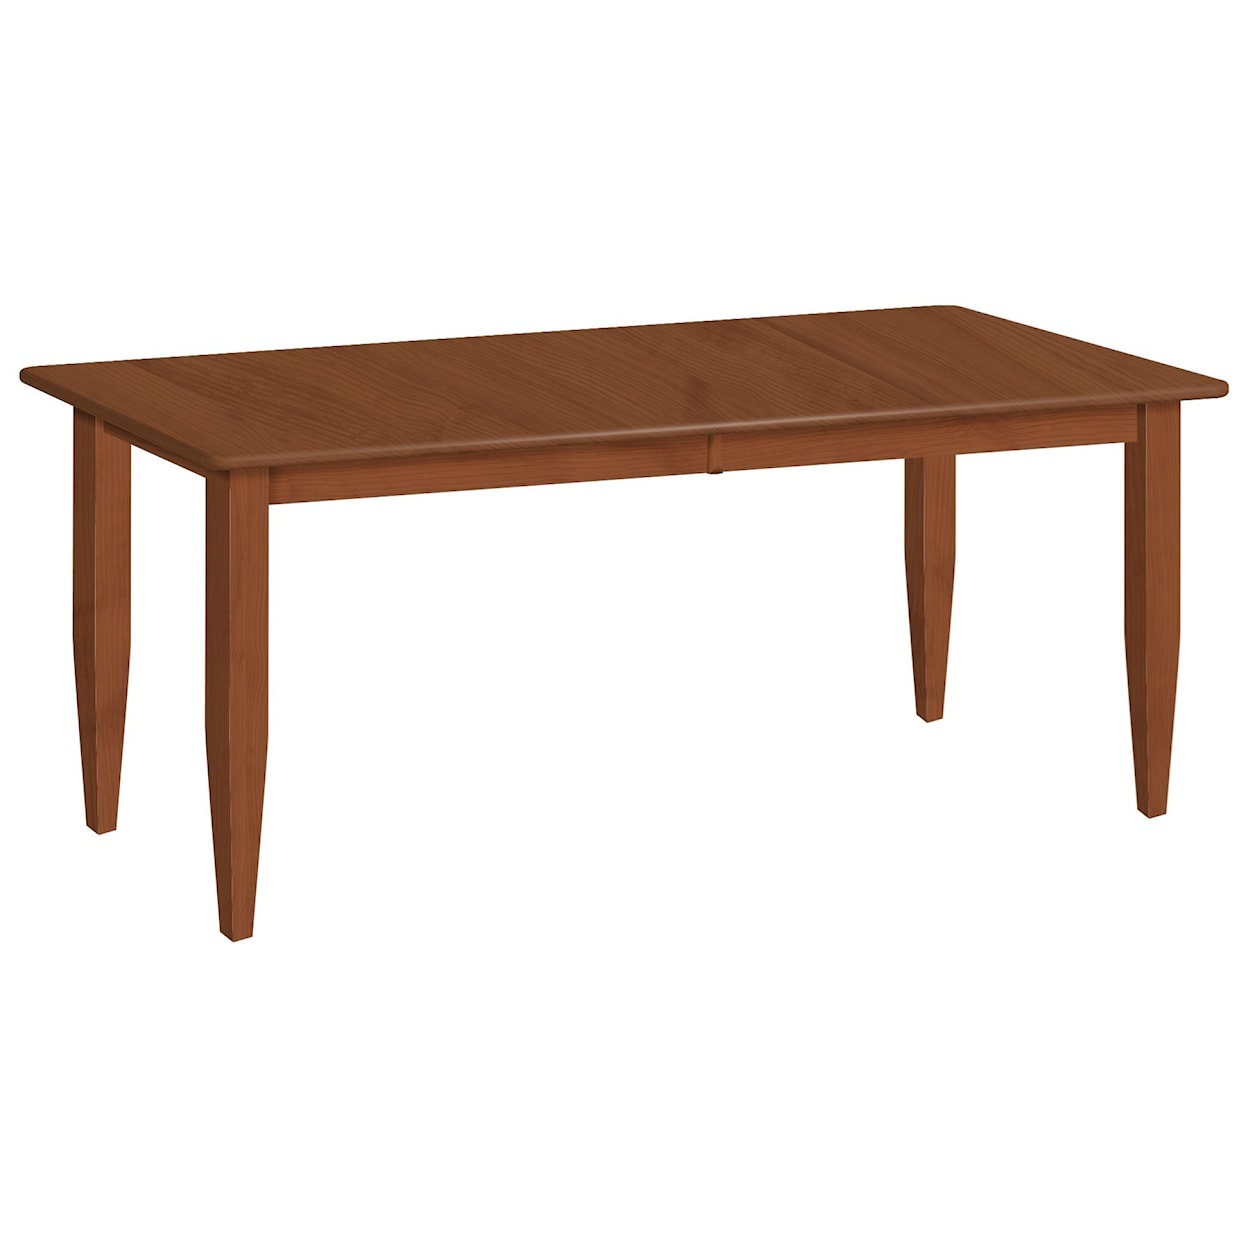 Daniels Amish Franklin Dining Table